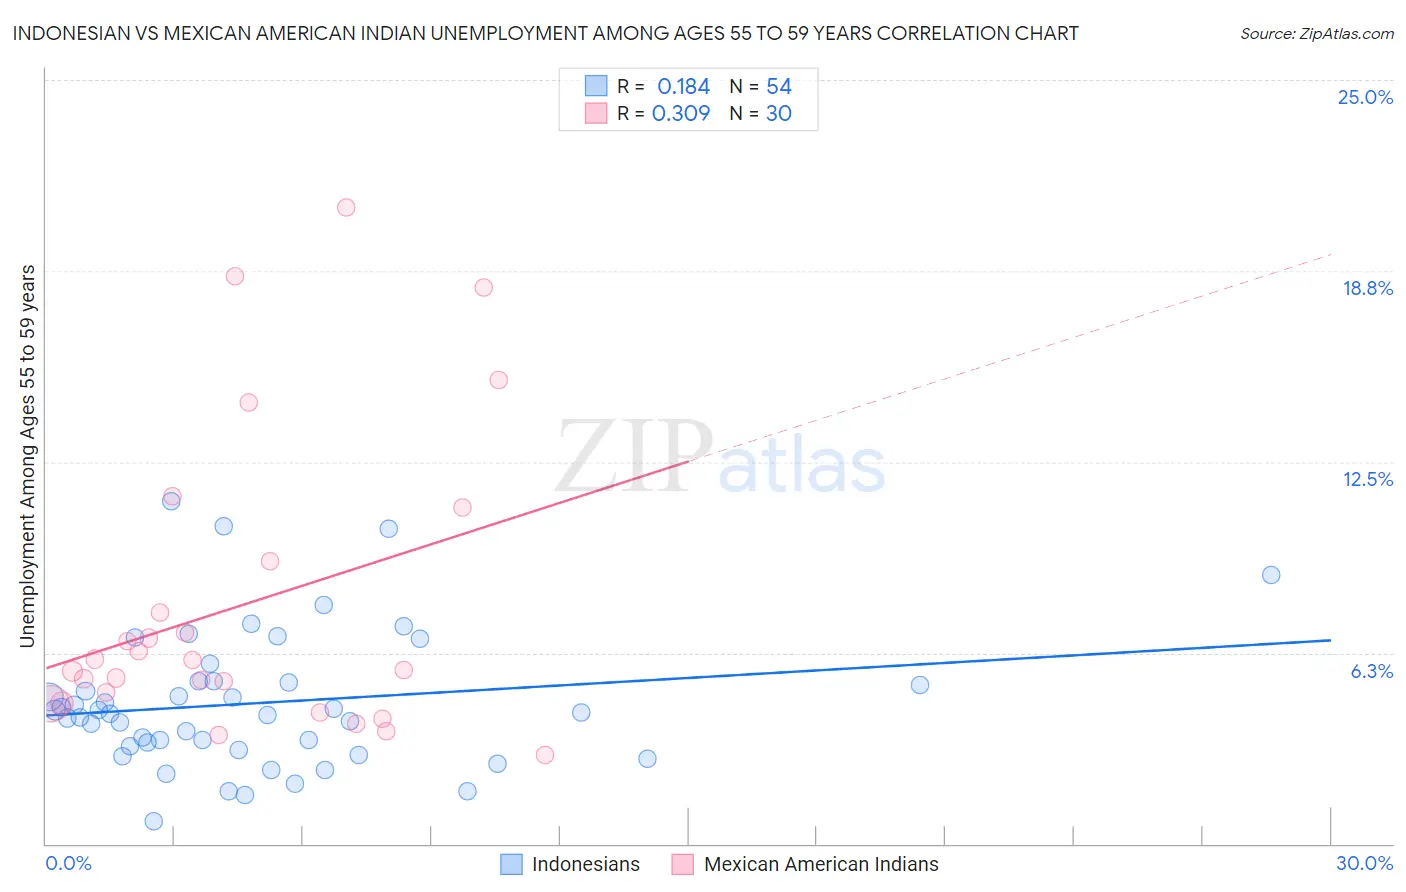 Indonesian vs Mexican American Indian Unemployment Among Ages 55 to 59 years